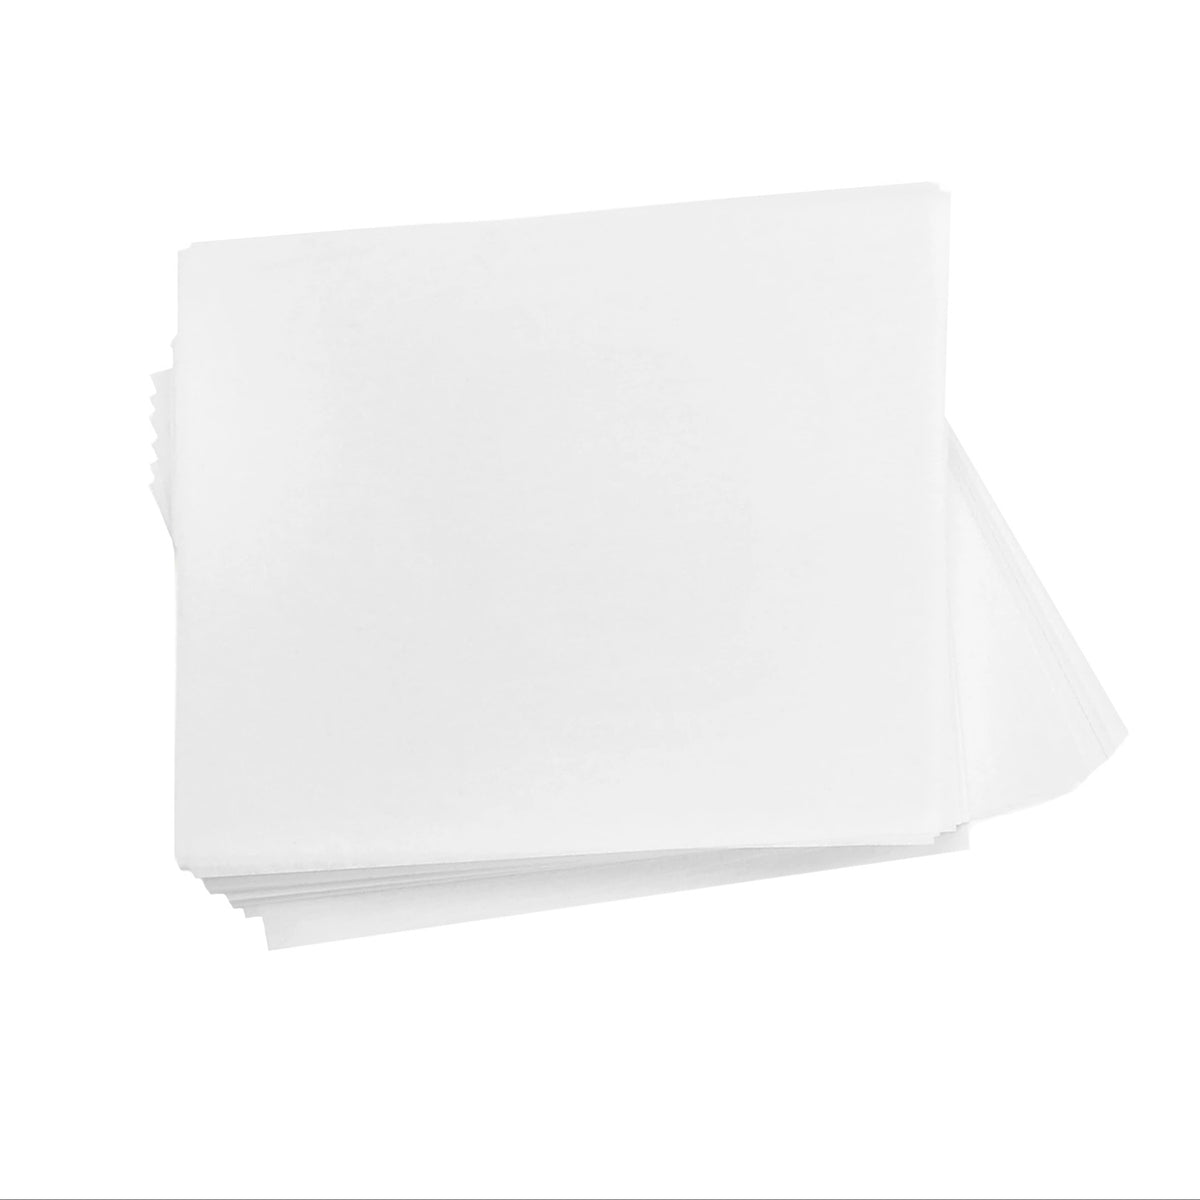 6 x 12 Inches Rosin Parchment Paper, 2-Side Coating, Heat Press & Scra –